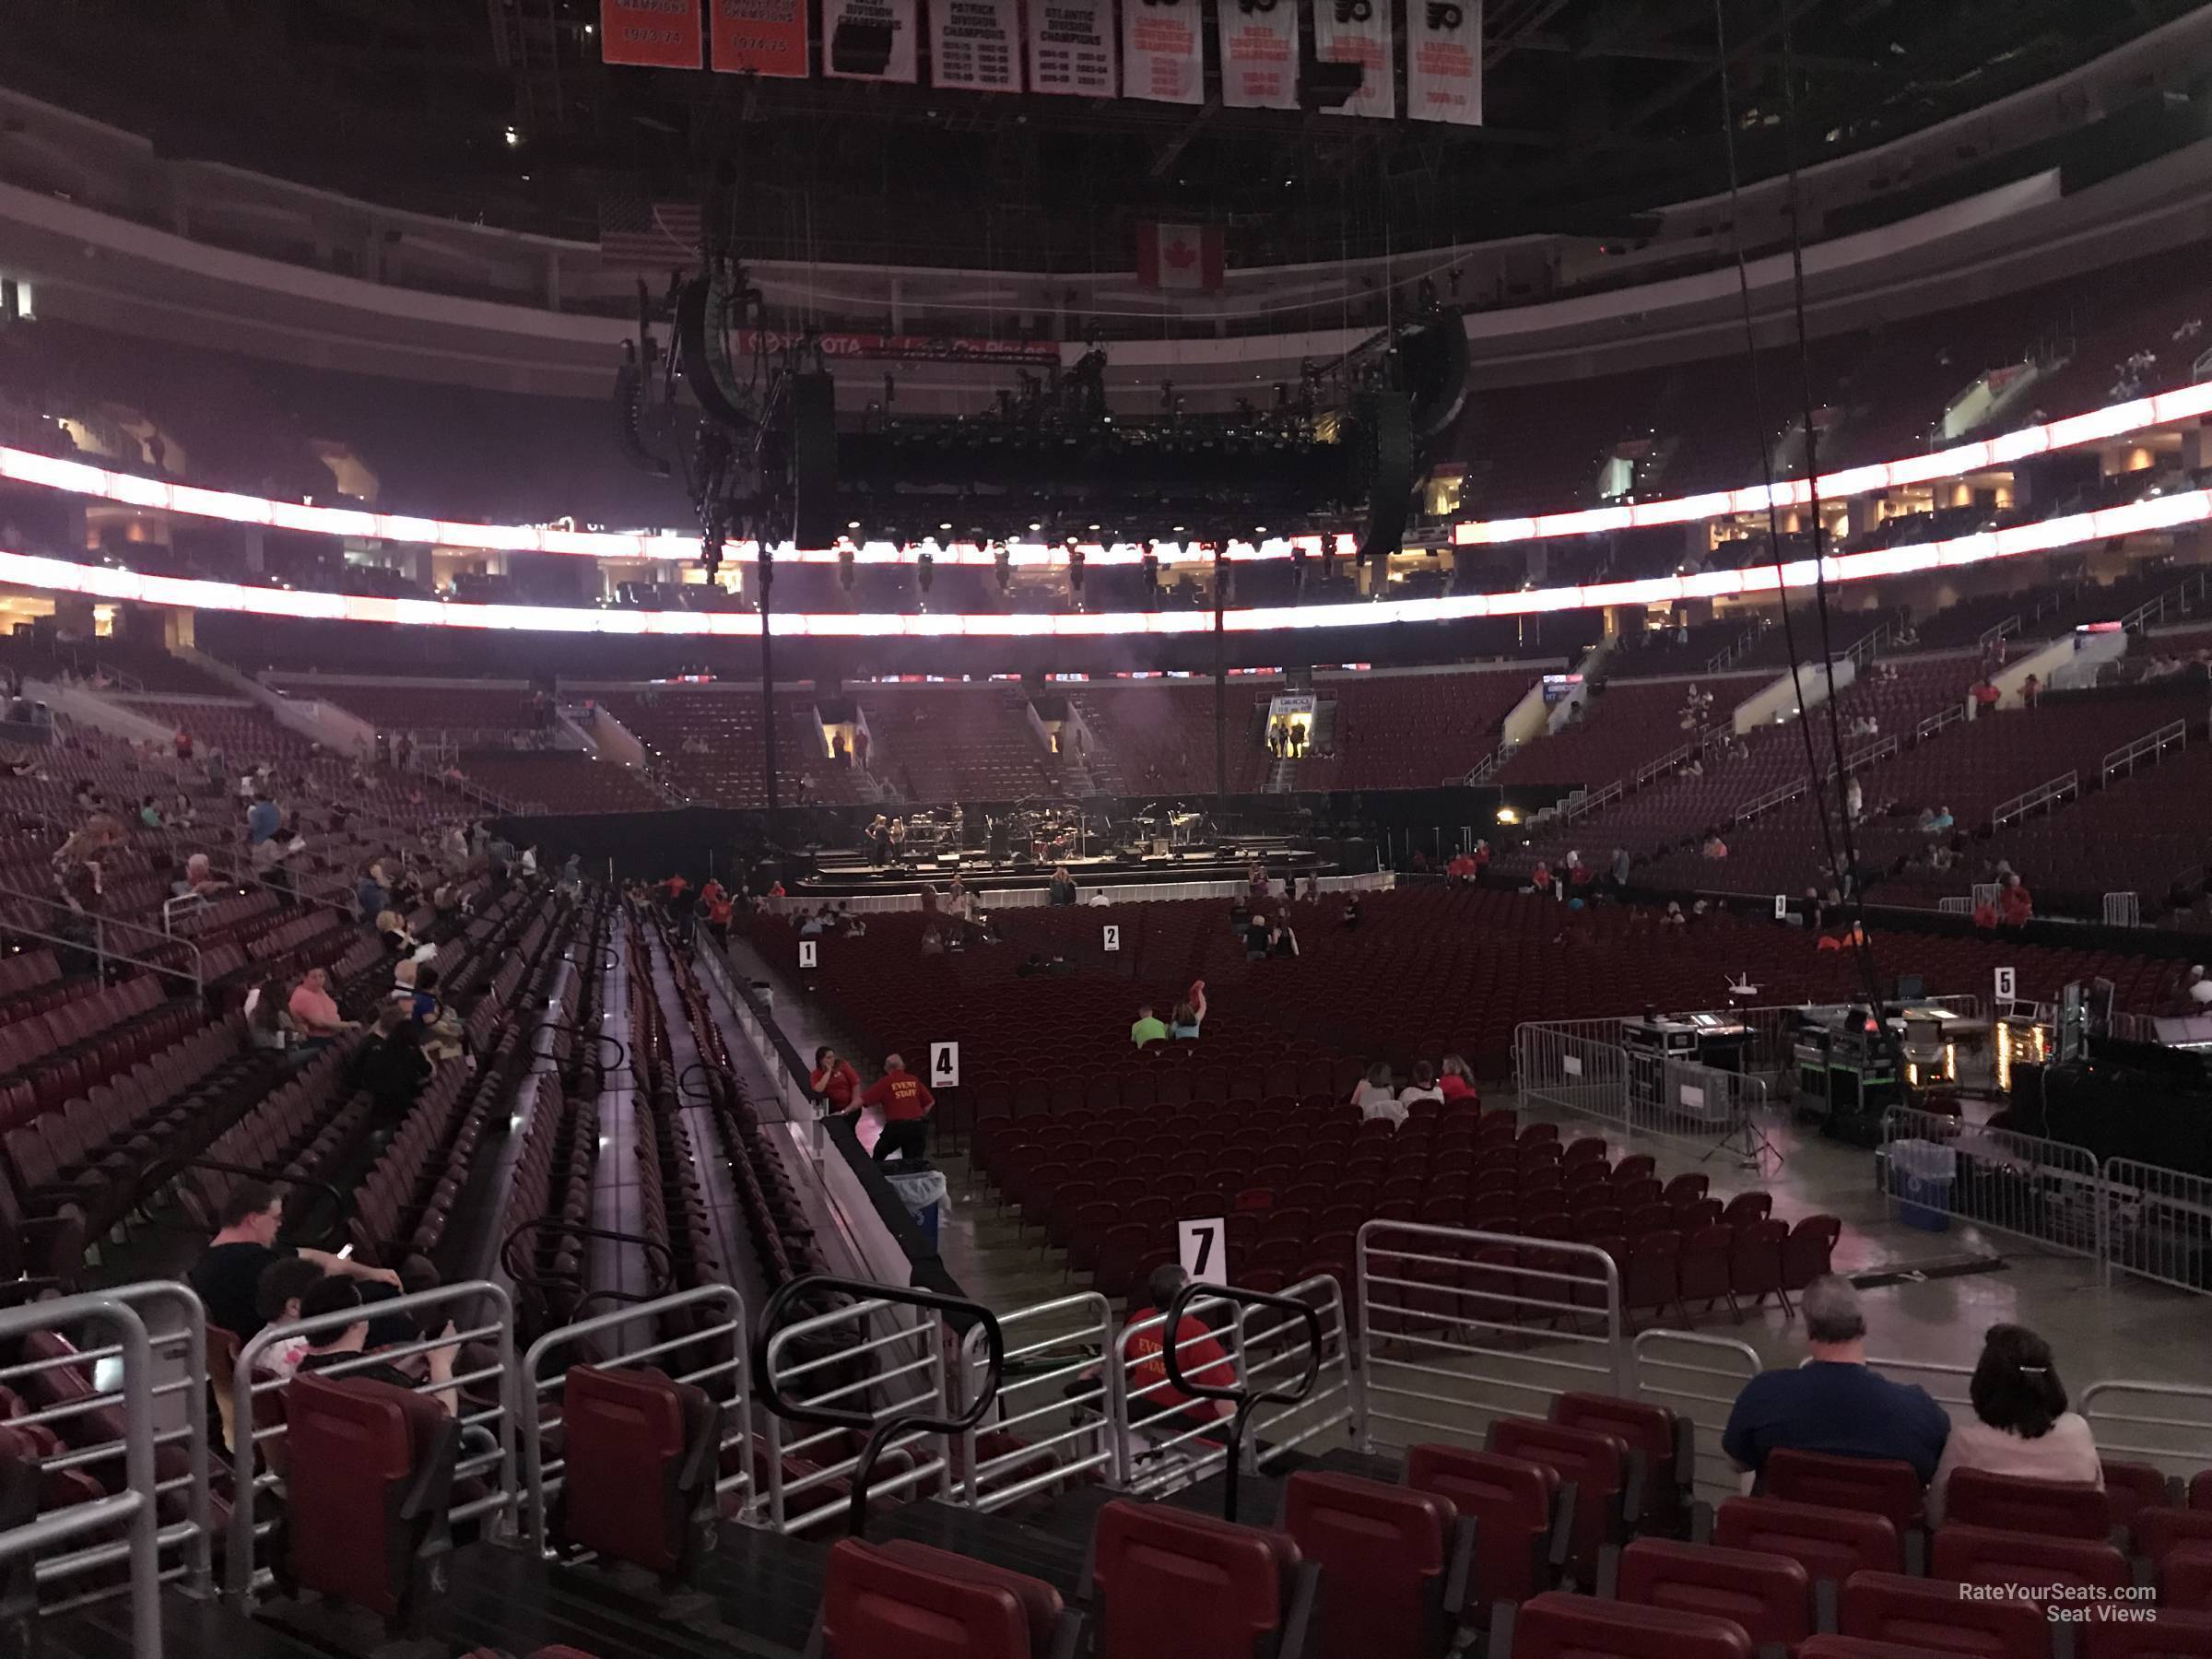 section 105, row 8 seat view  for concert - wells fargo center